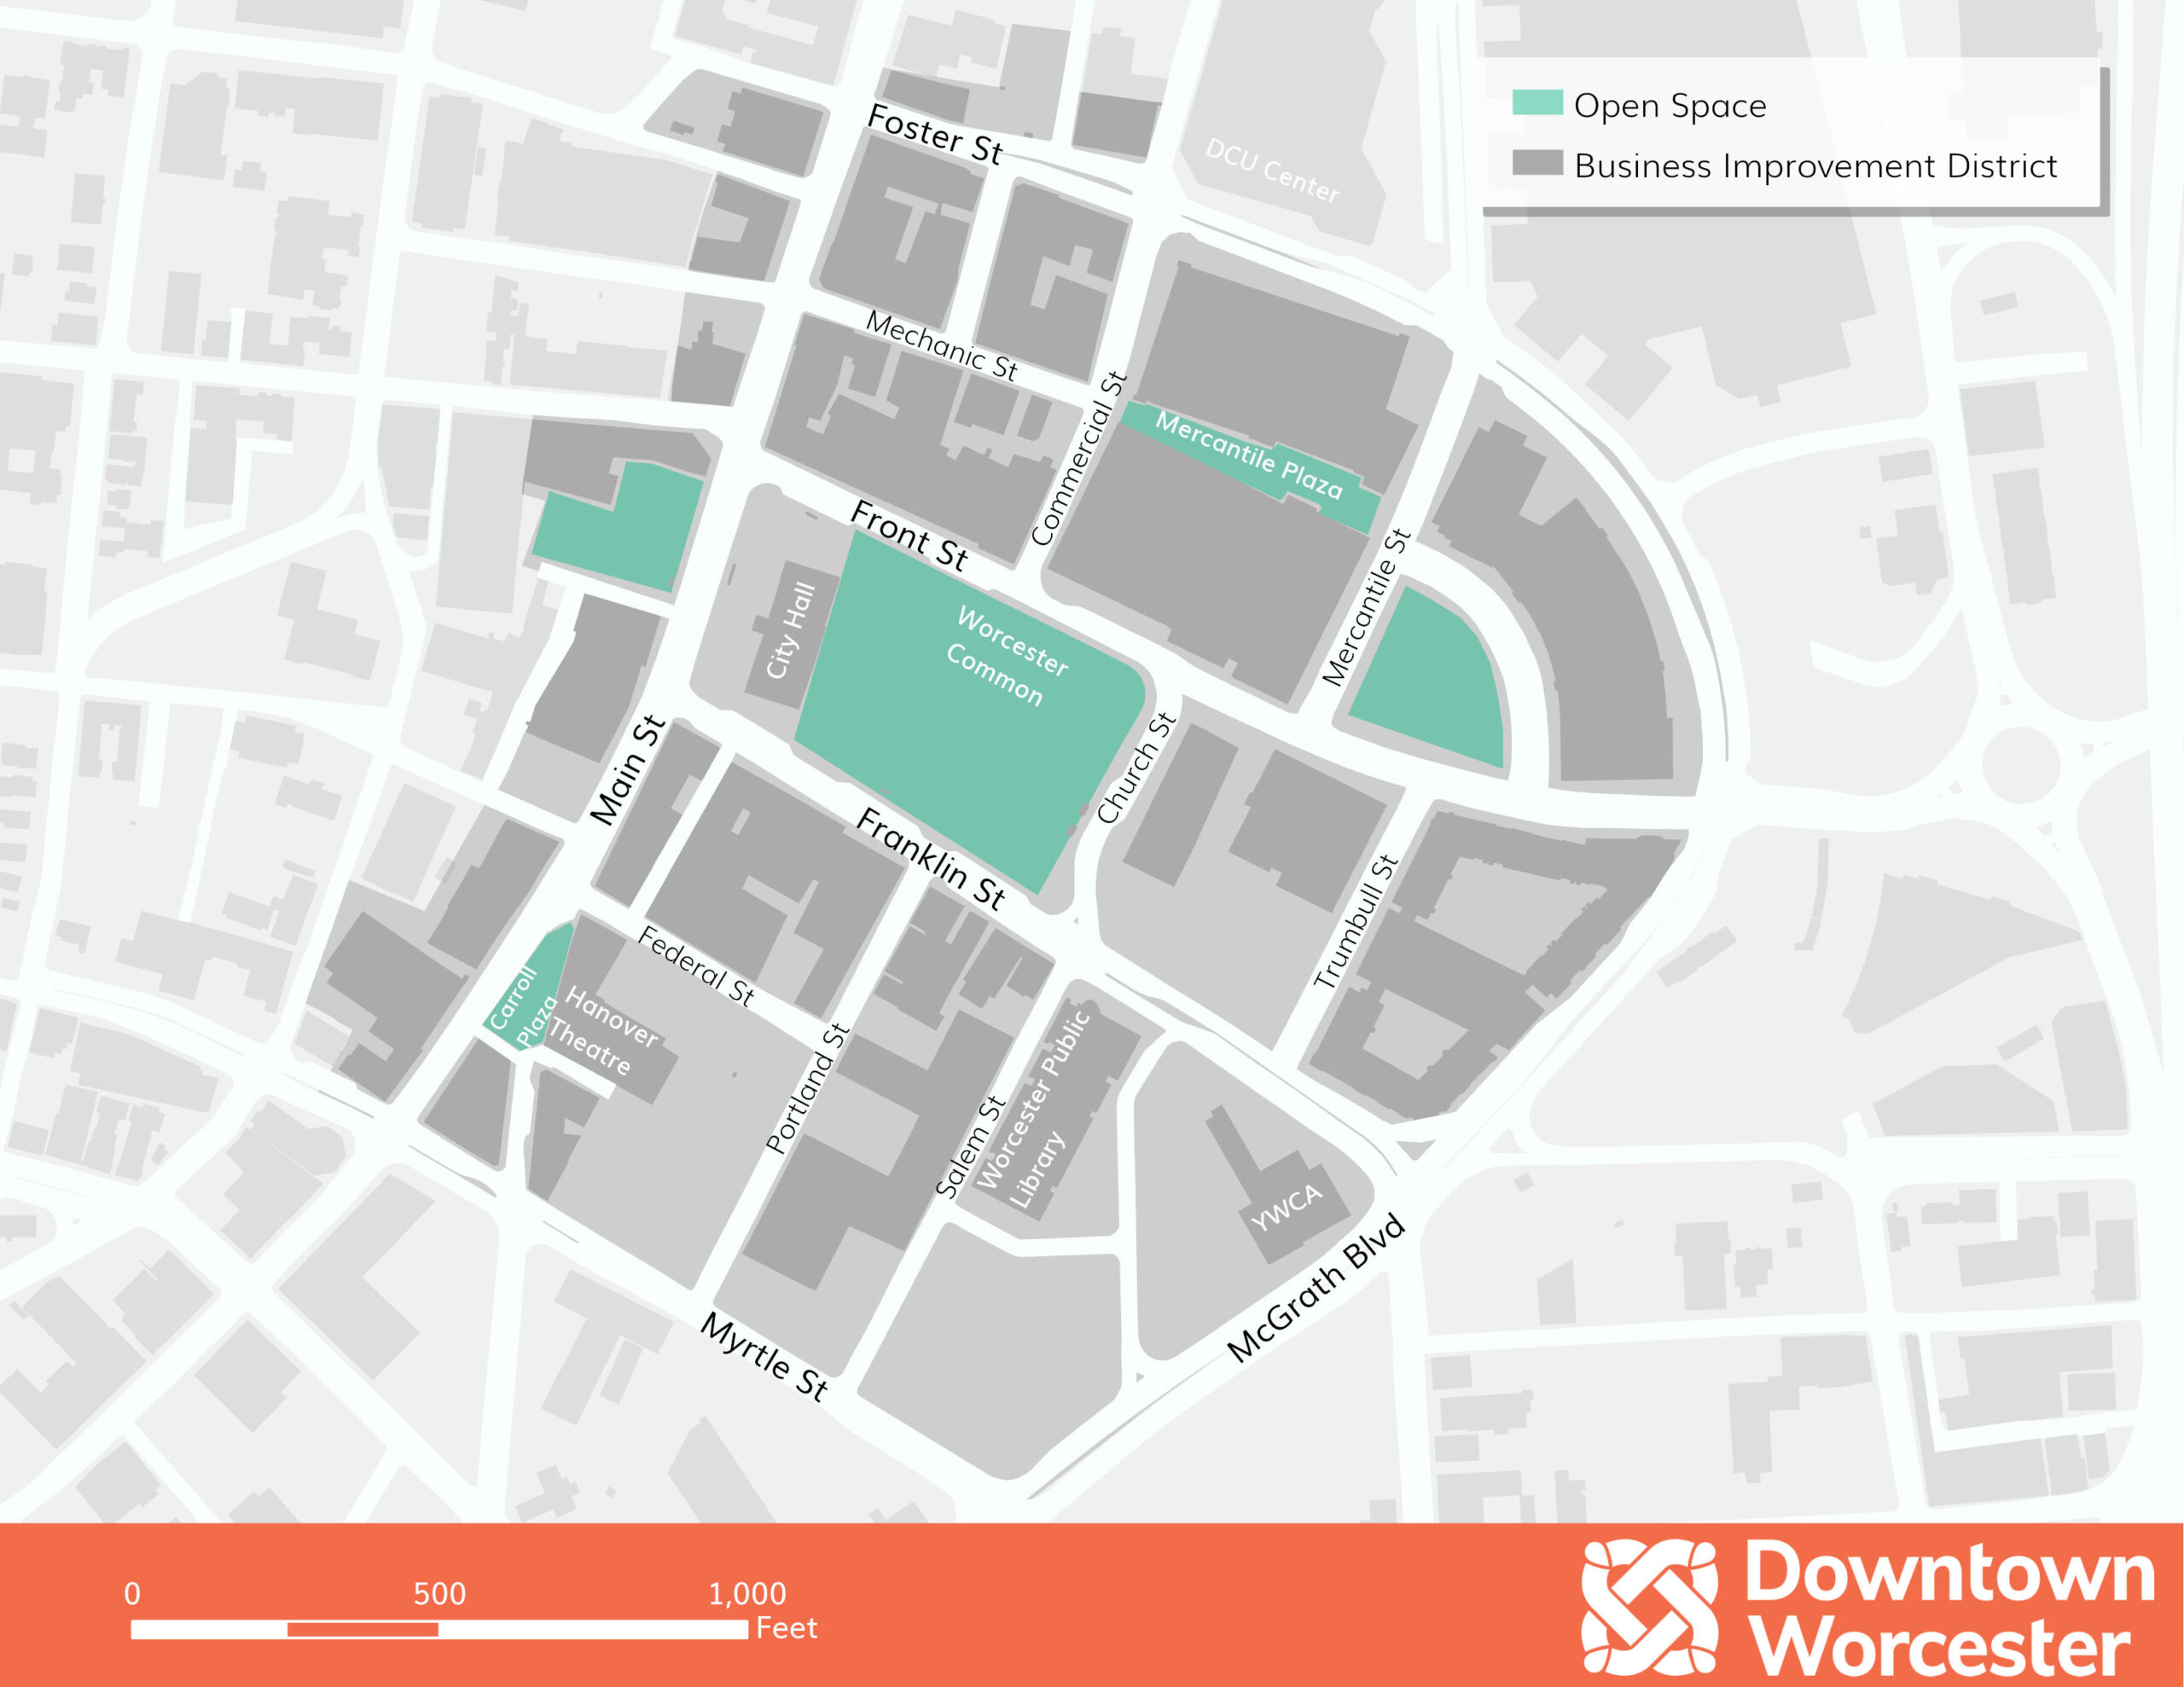 A graphic depiction of the boundaries that the Downtown Worcester Business Improvement District serves.